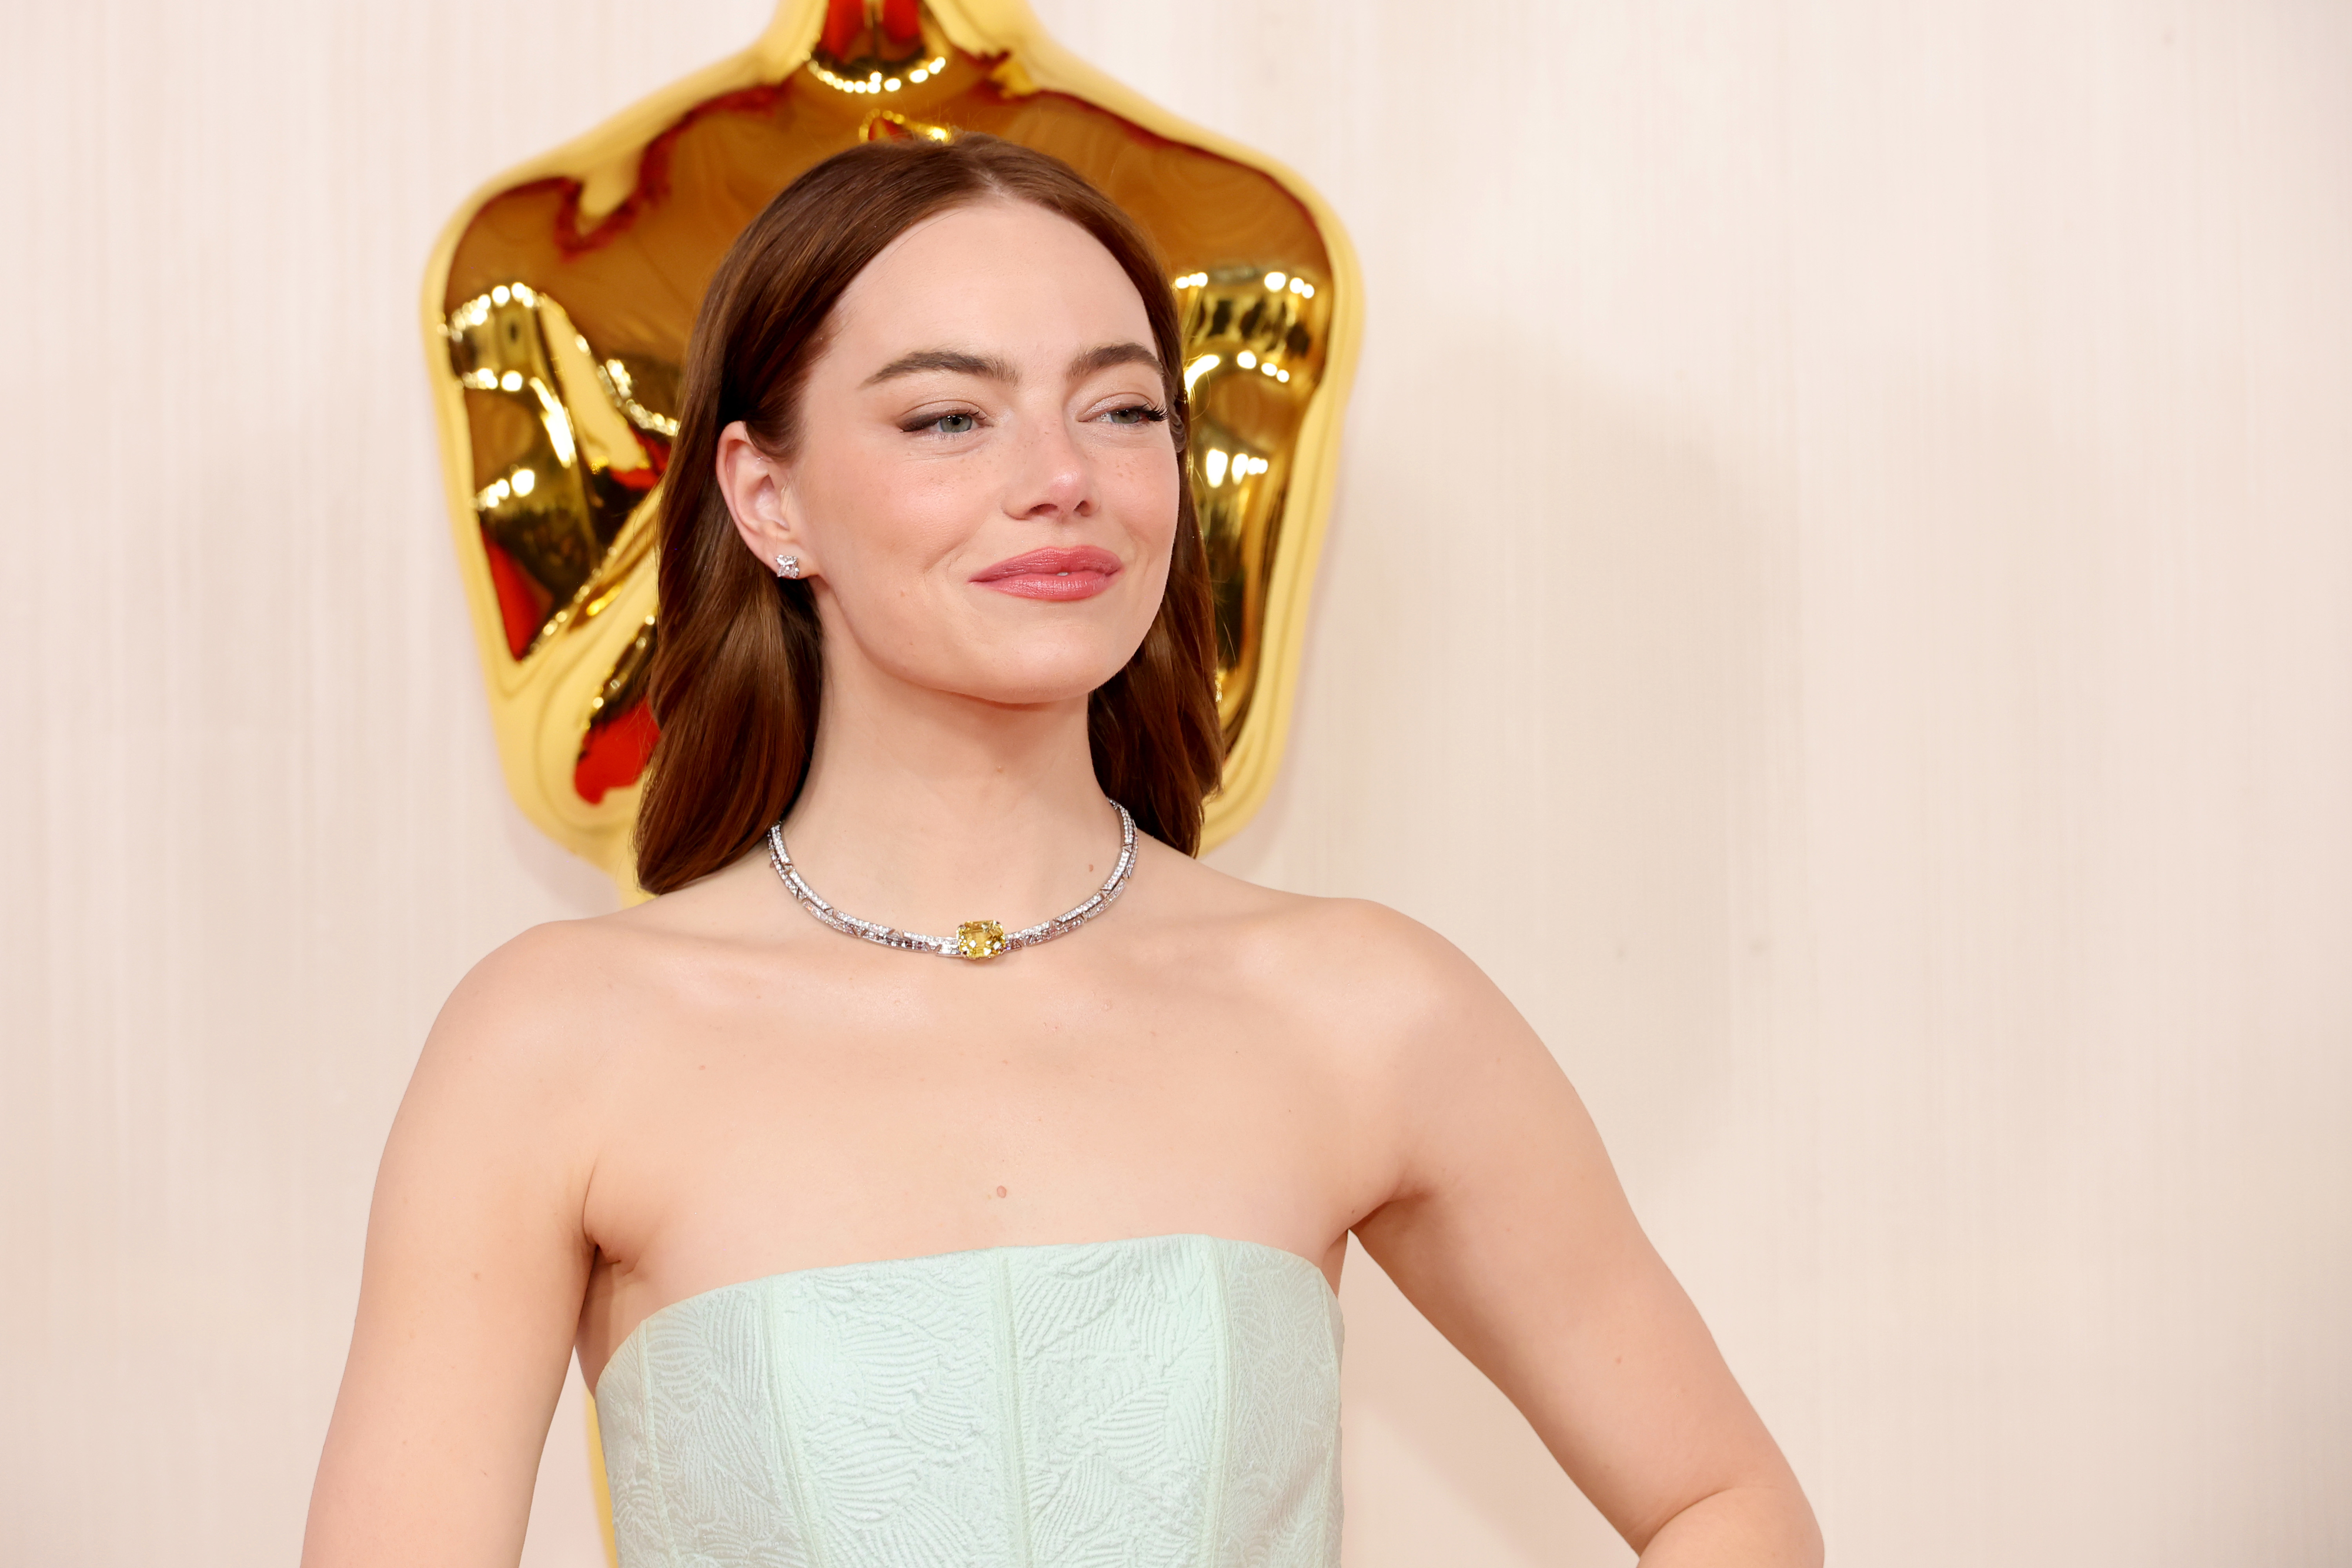 Emma Stone wearing a strapless dress with a statement necklace